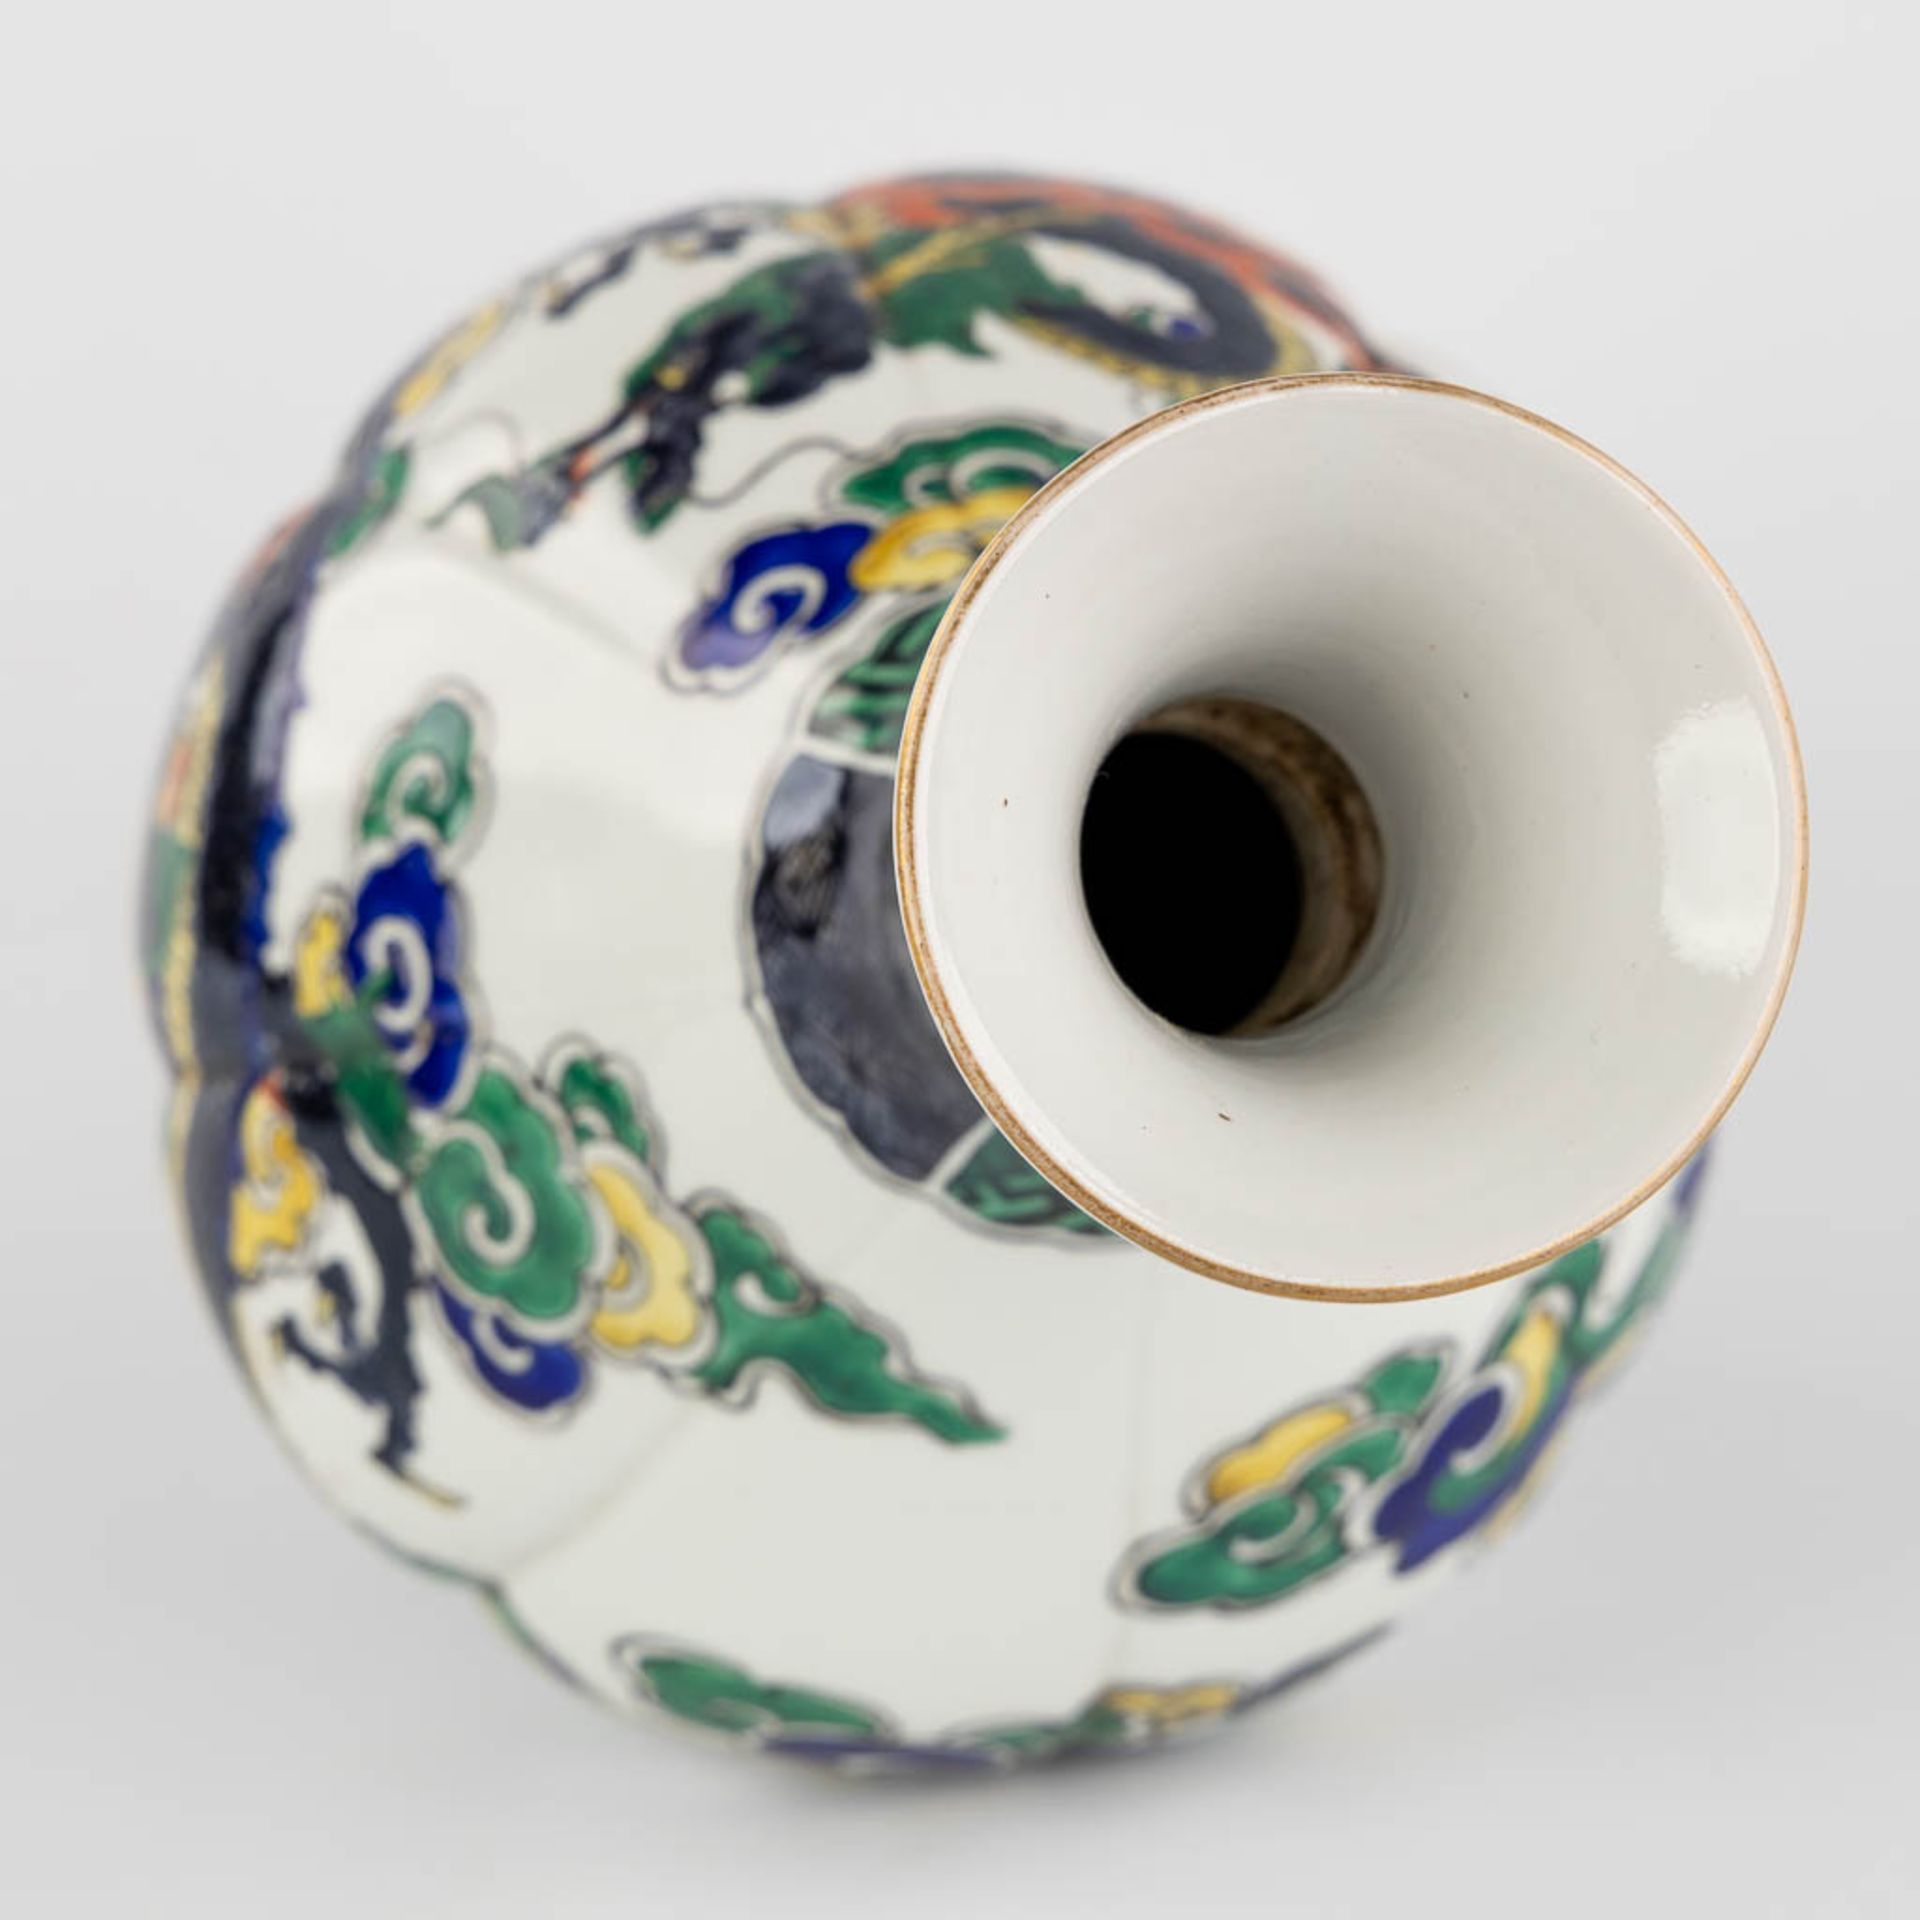 An antique Japanese vase with a three clawed dragon decor, 19th C. (H:30 x D:18 cm) - Image 8 of 10